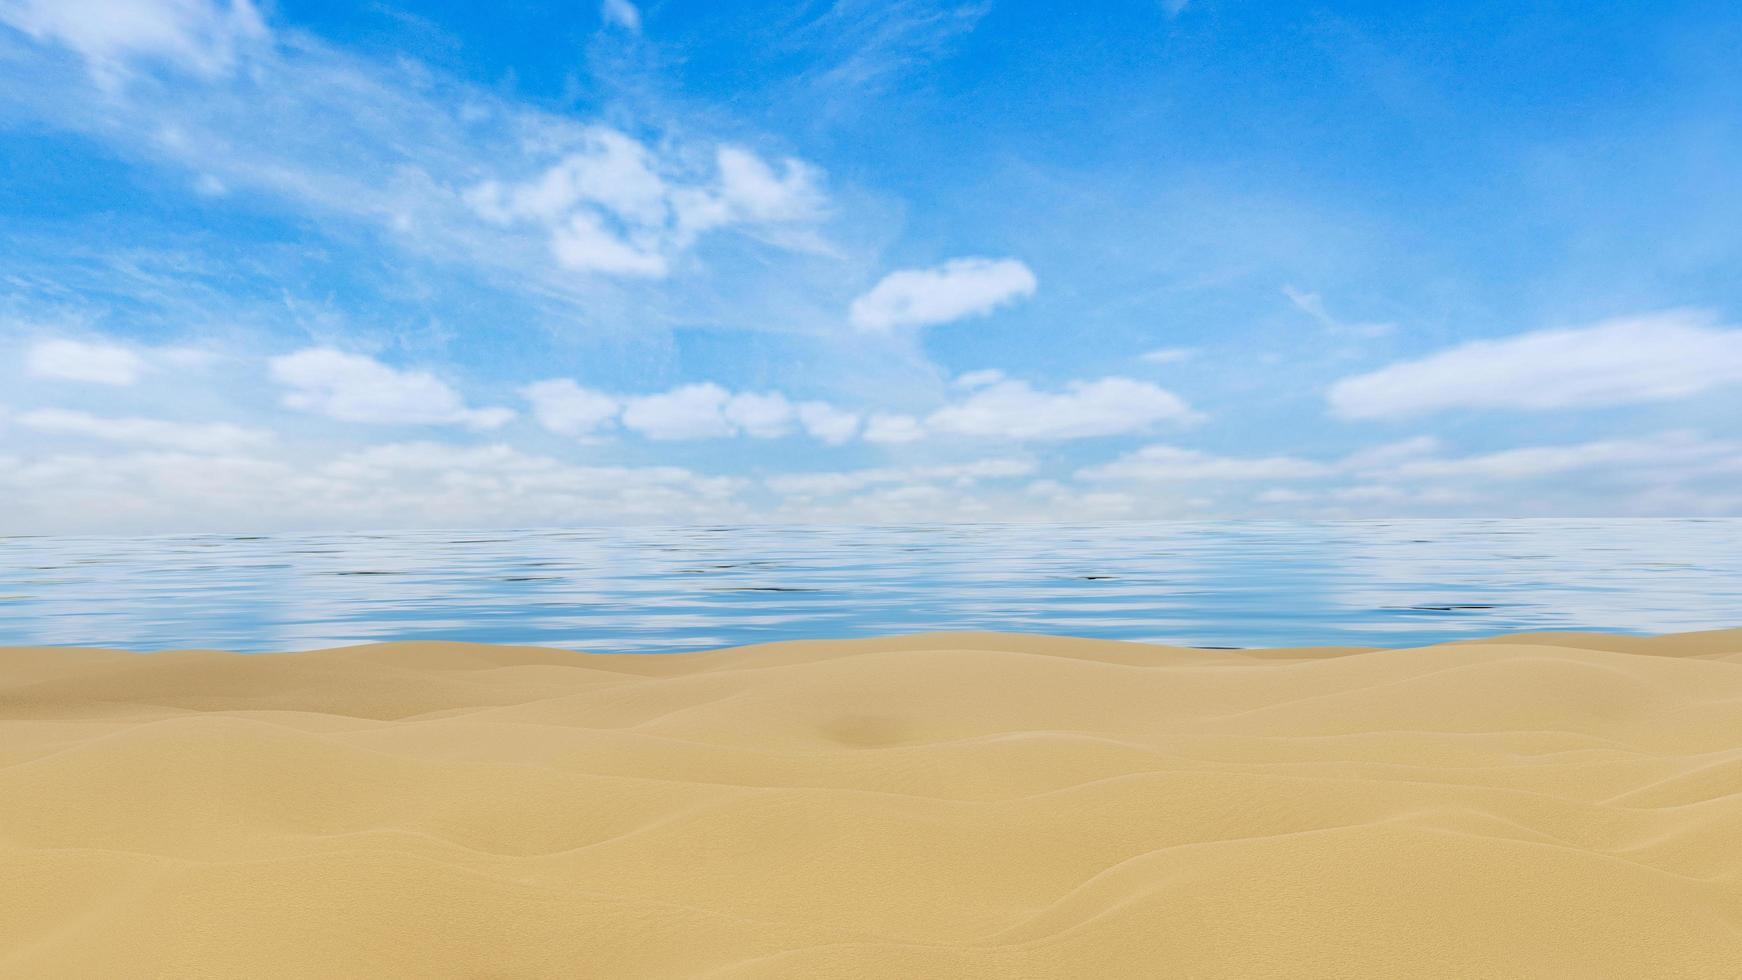 Sand at the sea beach. bright blue sky and the sea has little waves. seaside scenery in the daytime. 3d rendering photo